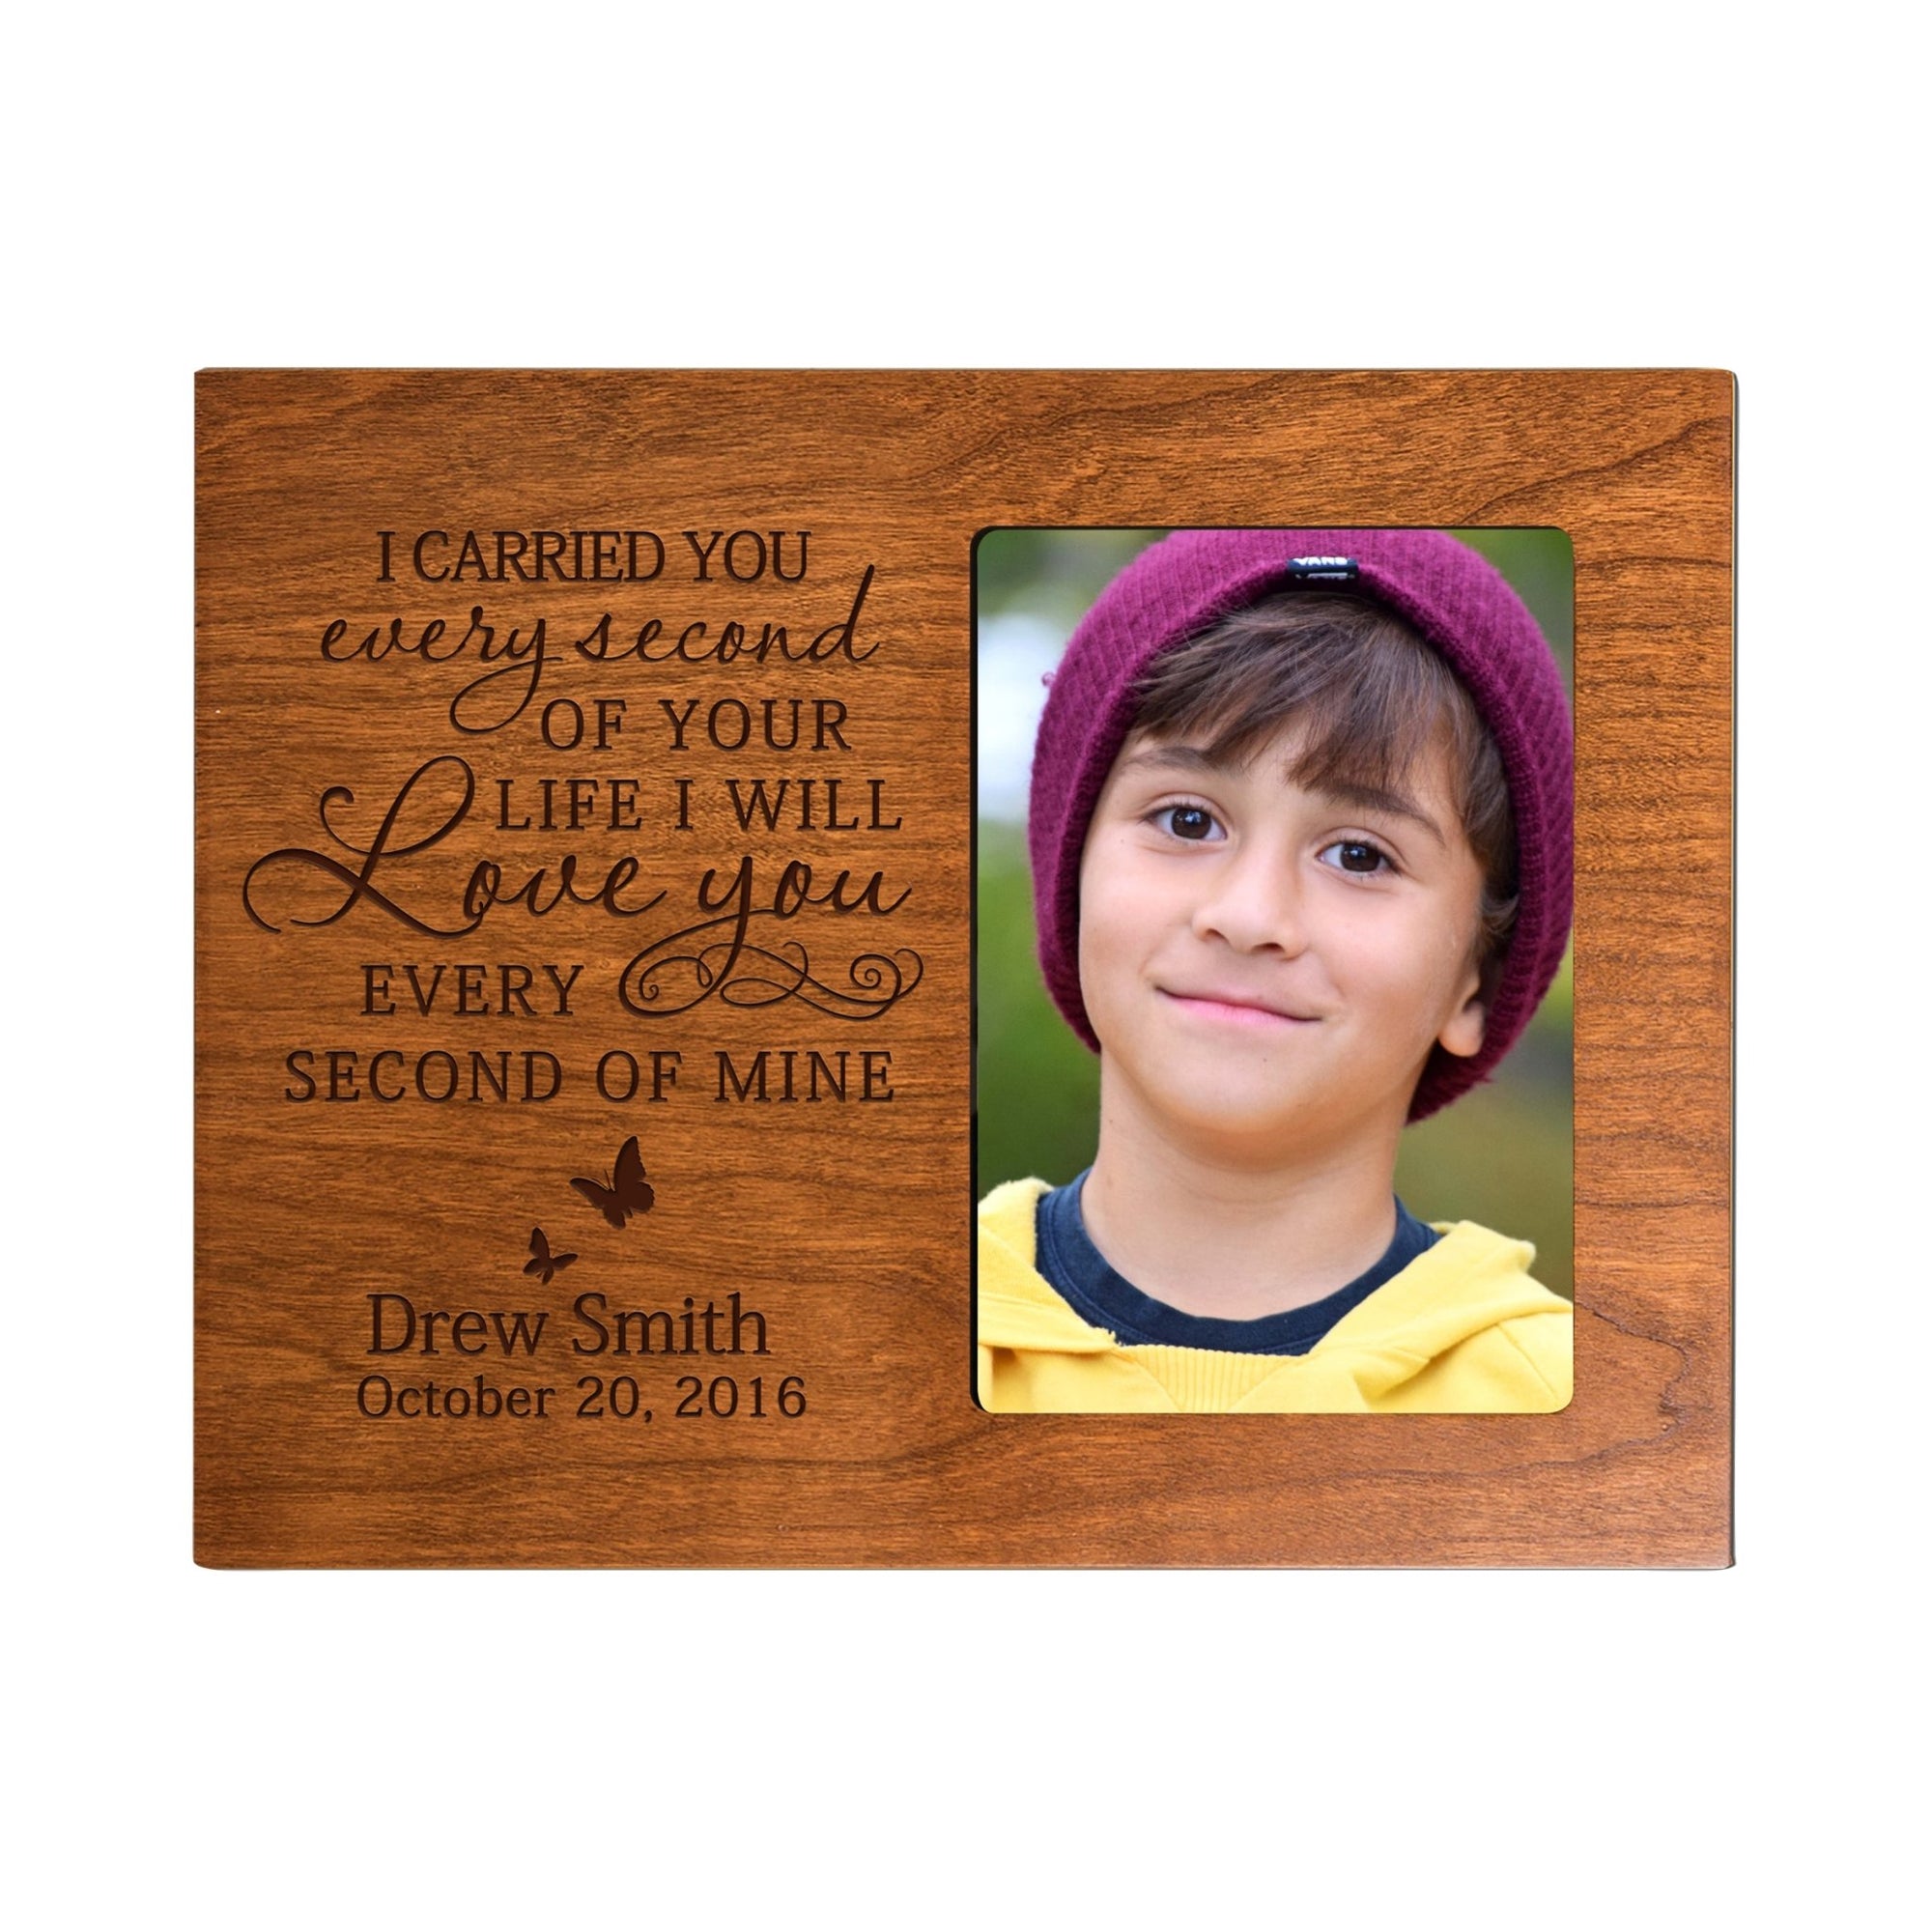 Personalized Wooden Memorial 8x10 Picture Frame holds 4x6 photo I Carried You Every Second - LifeSong Milestones